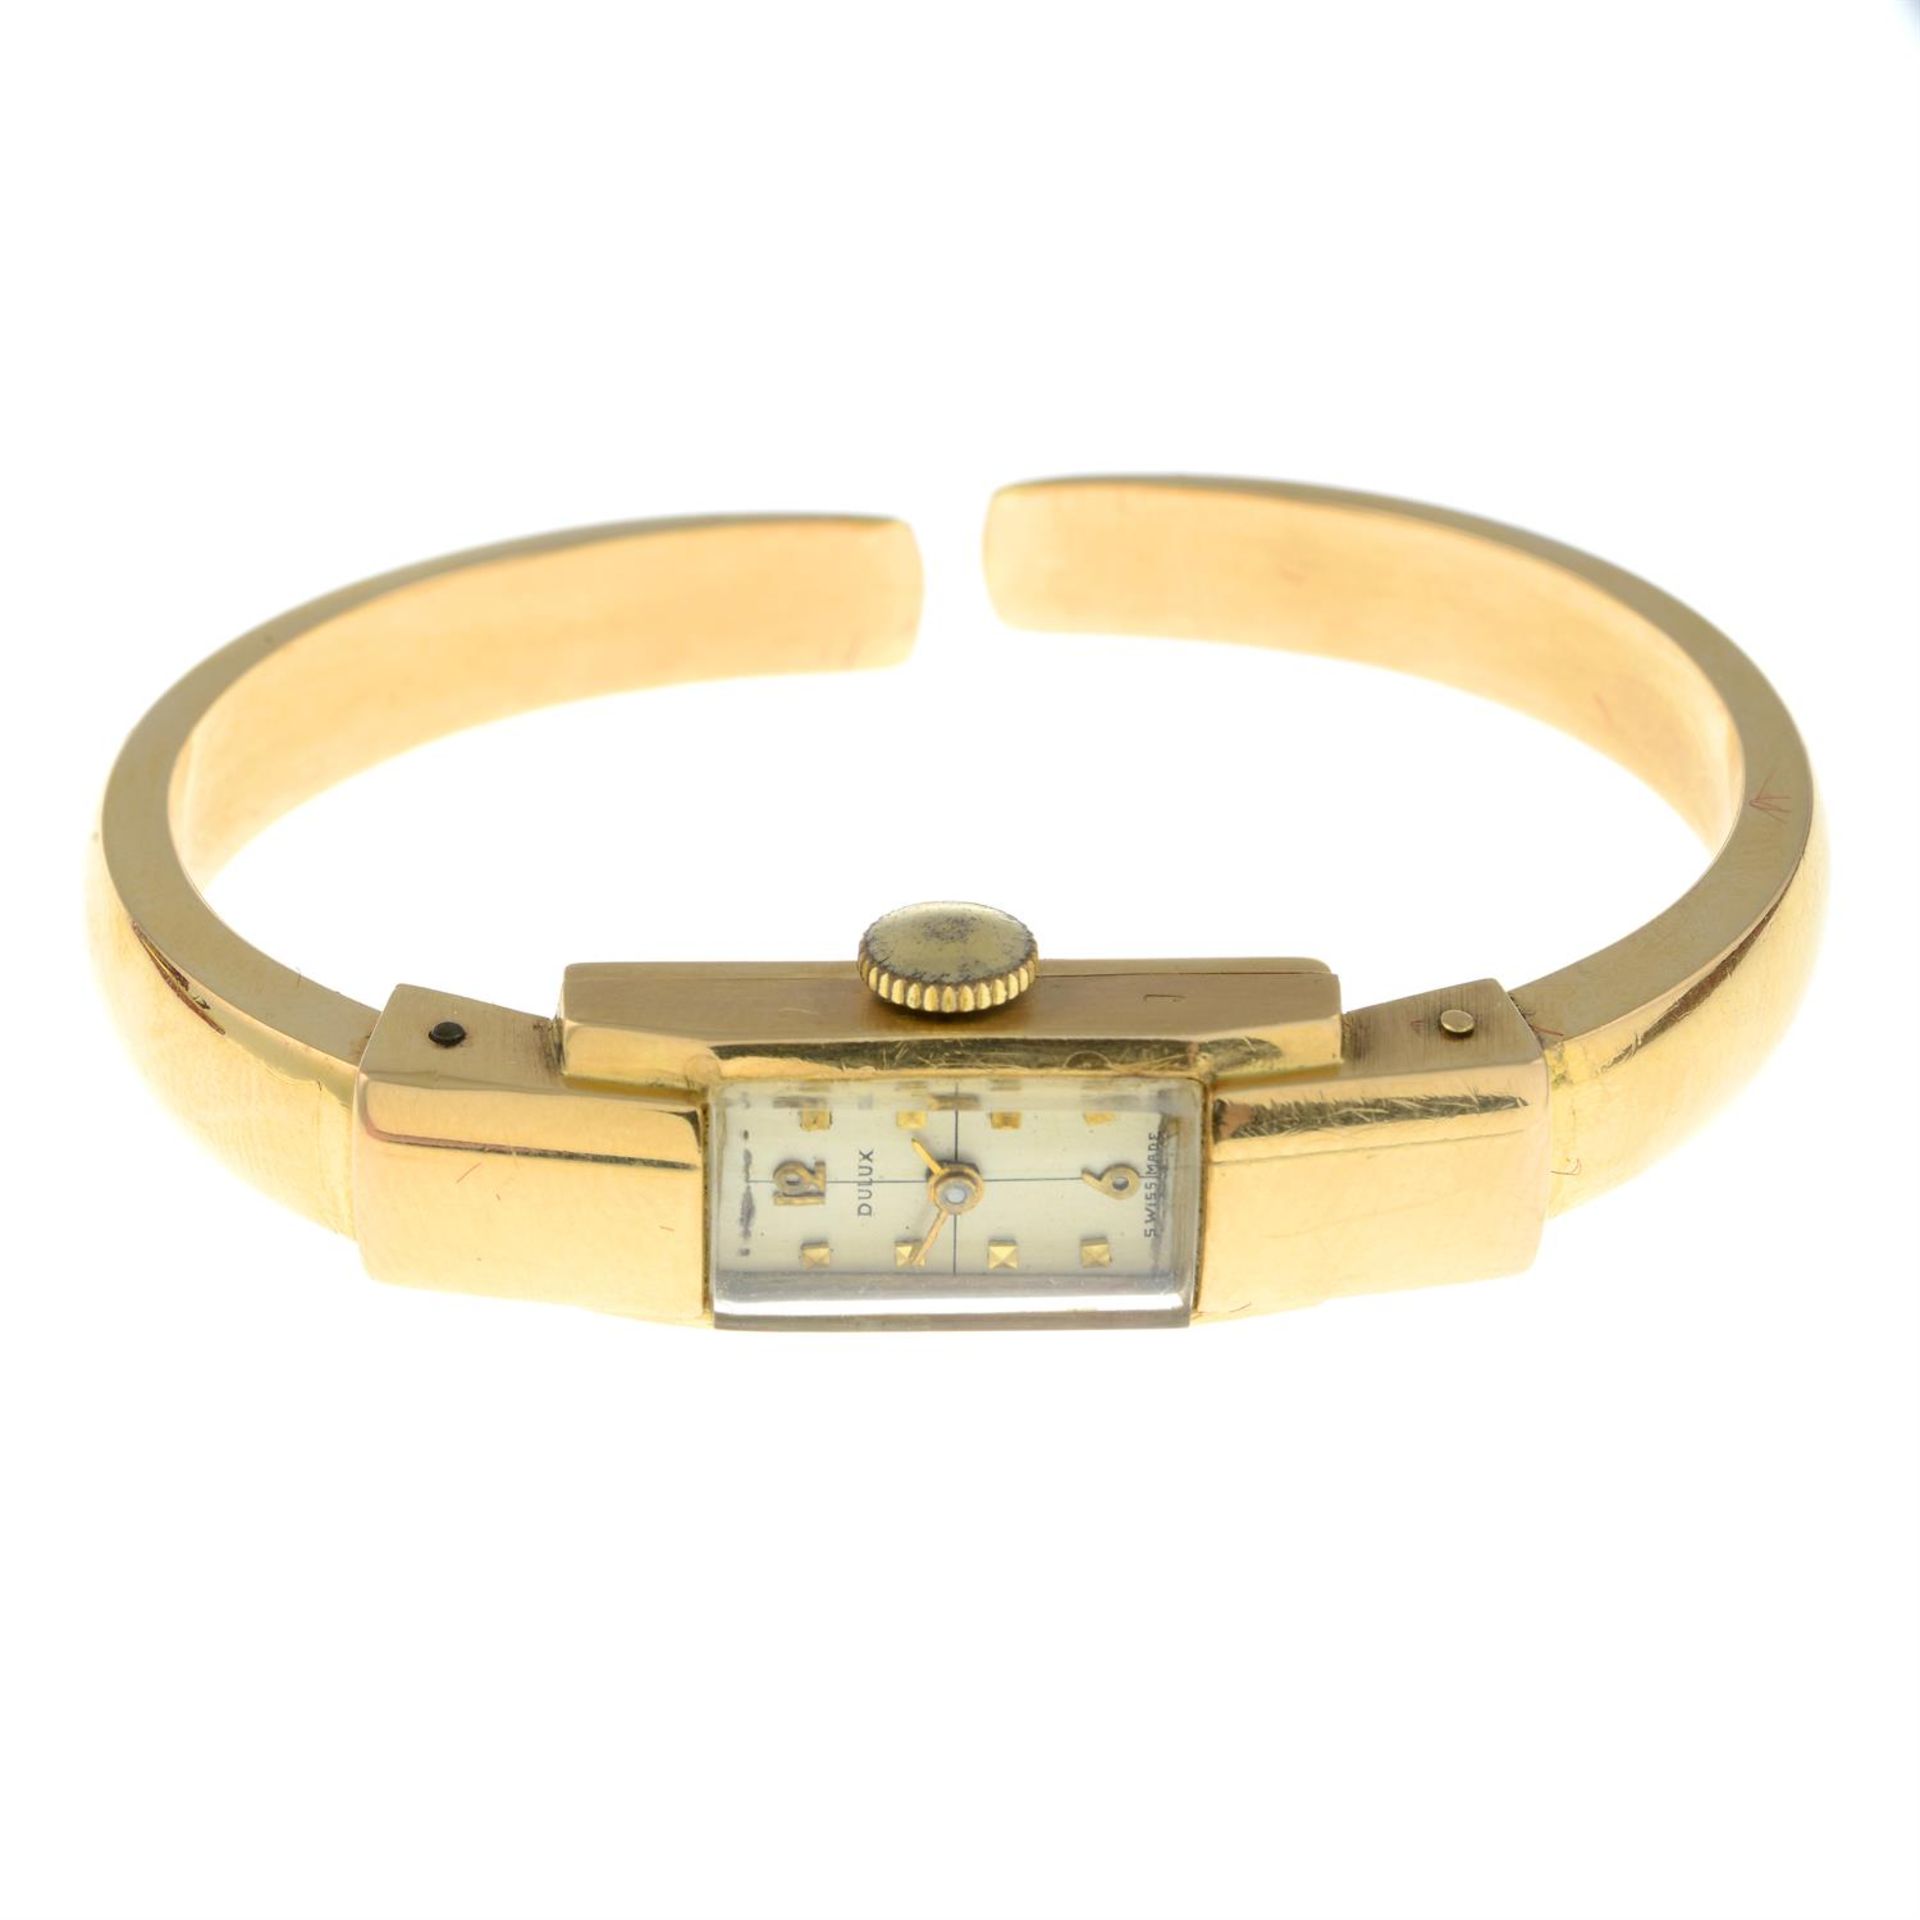 A ladies watch, by Dulux, retailed by Bucherer.